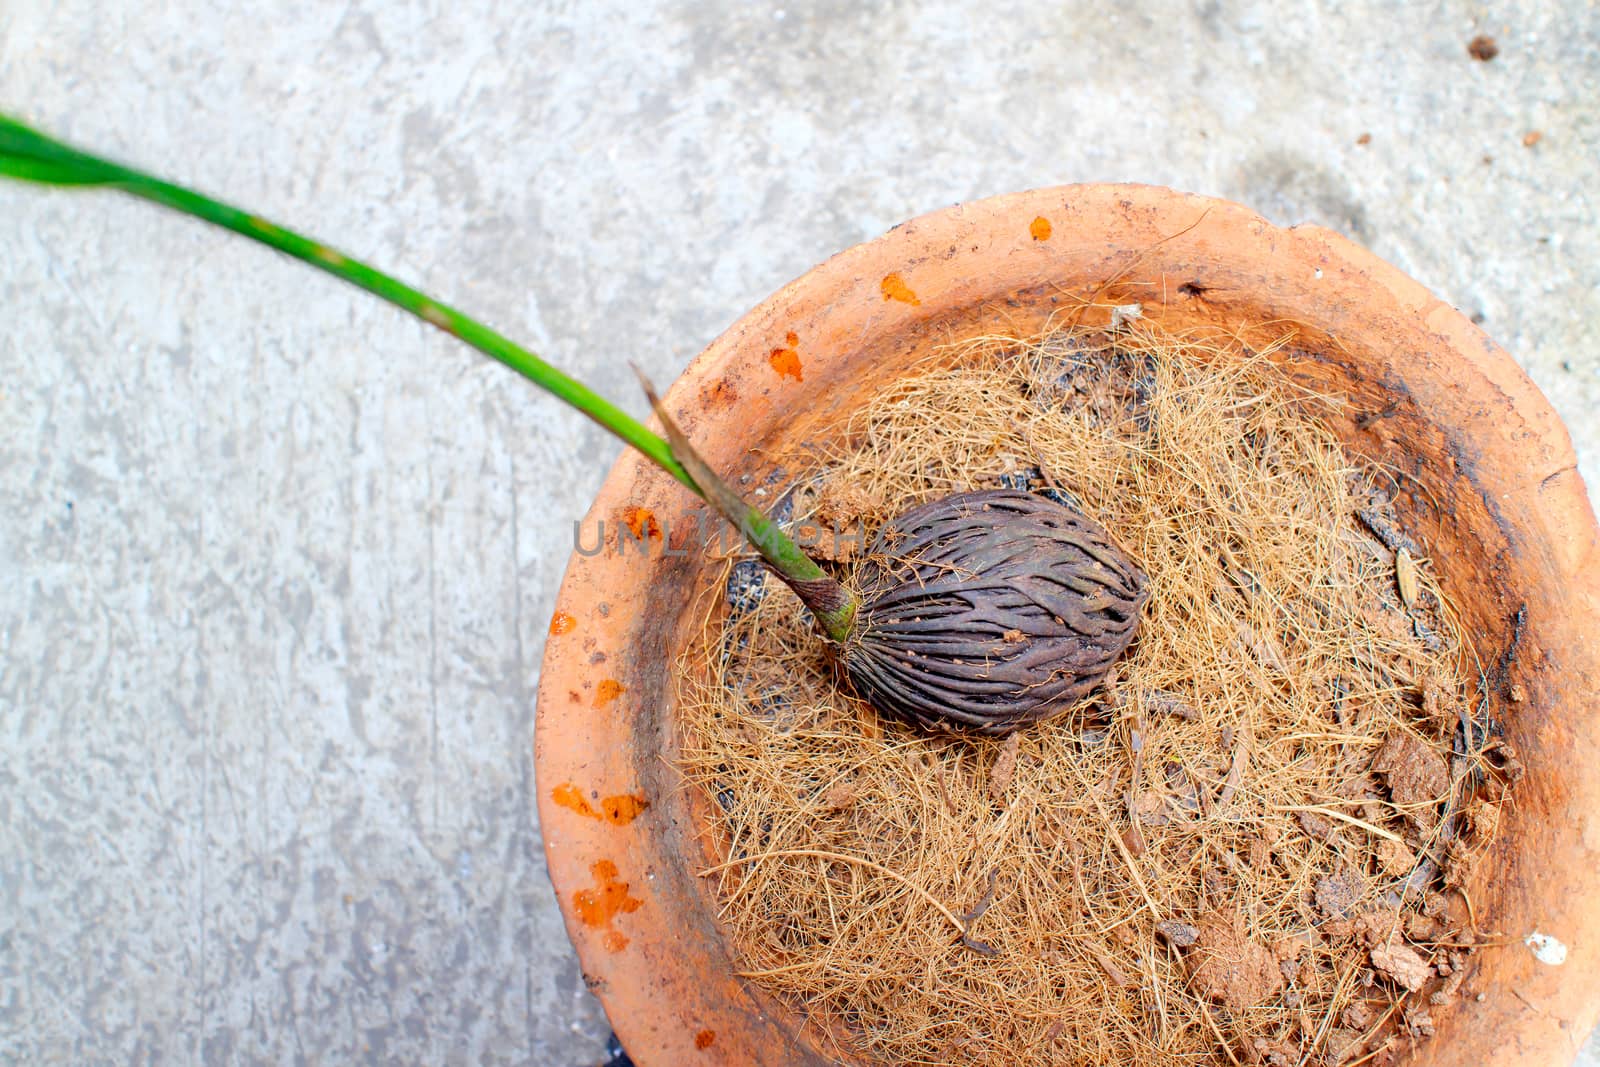 Foxtail palm growing in a small pot.